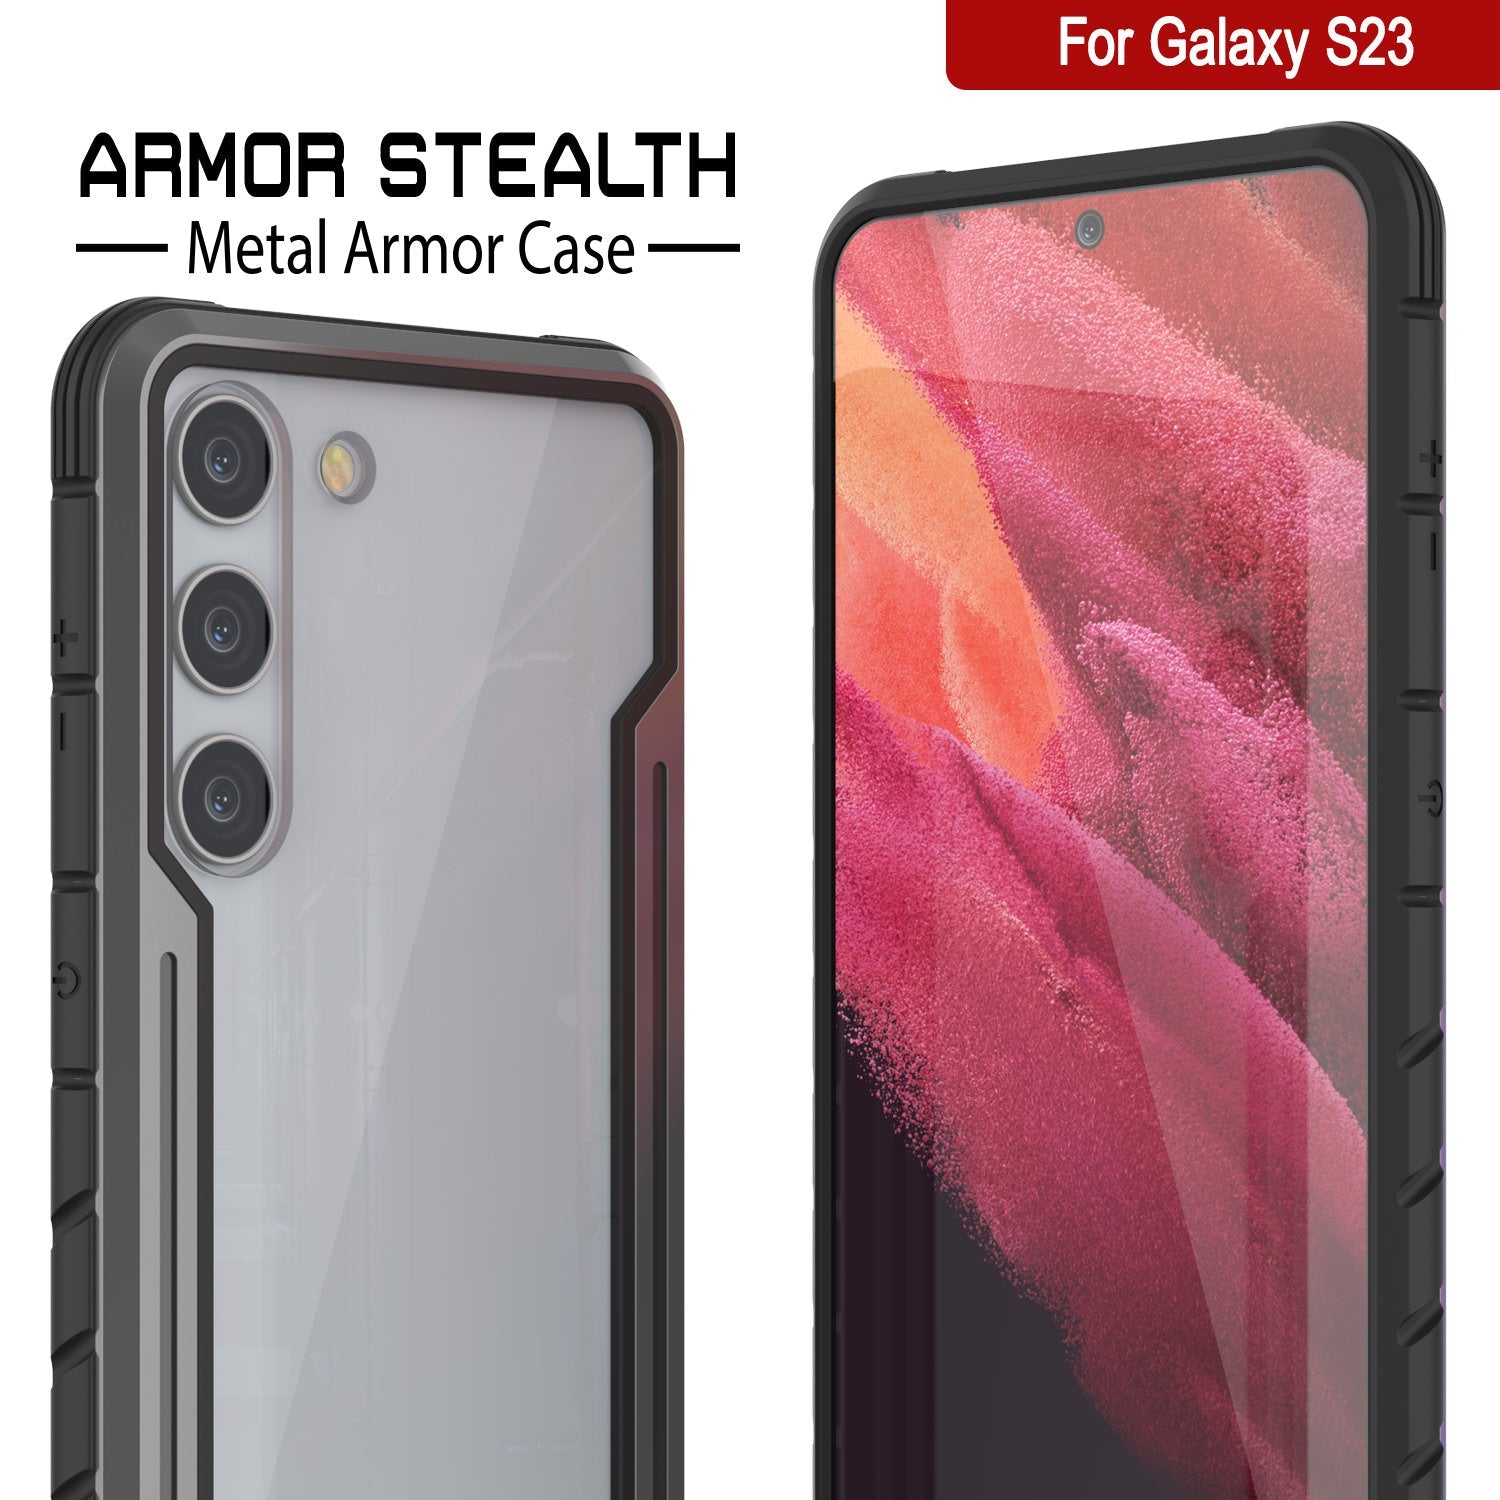 Punkcase S23 Armor Stealth Case Protective Military Grade Multilayer Cover [Grey-Black]